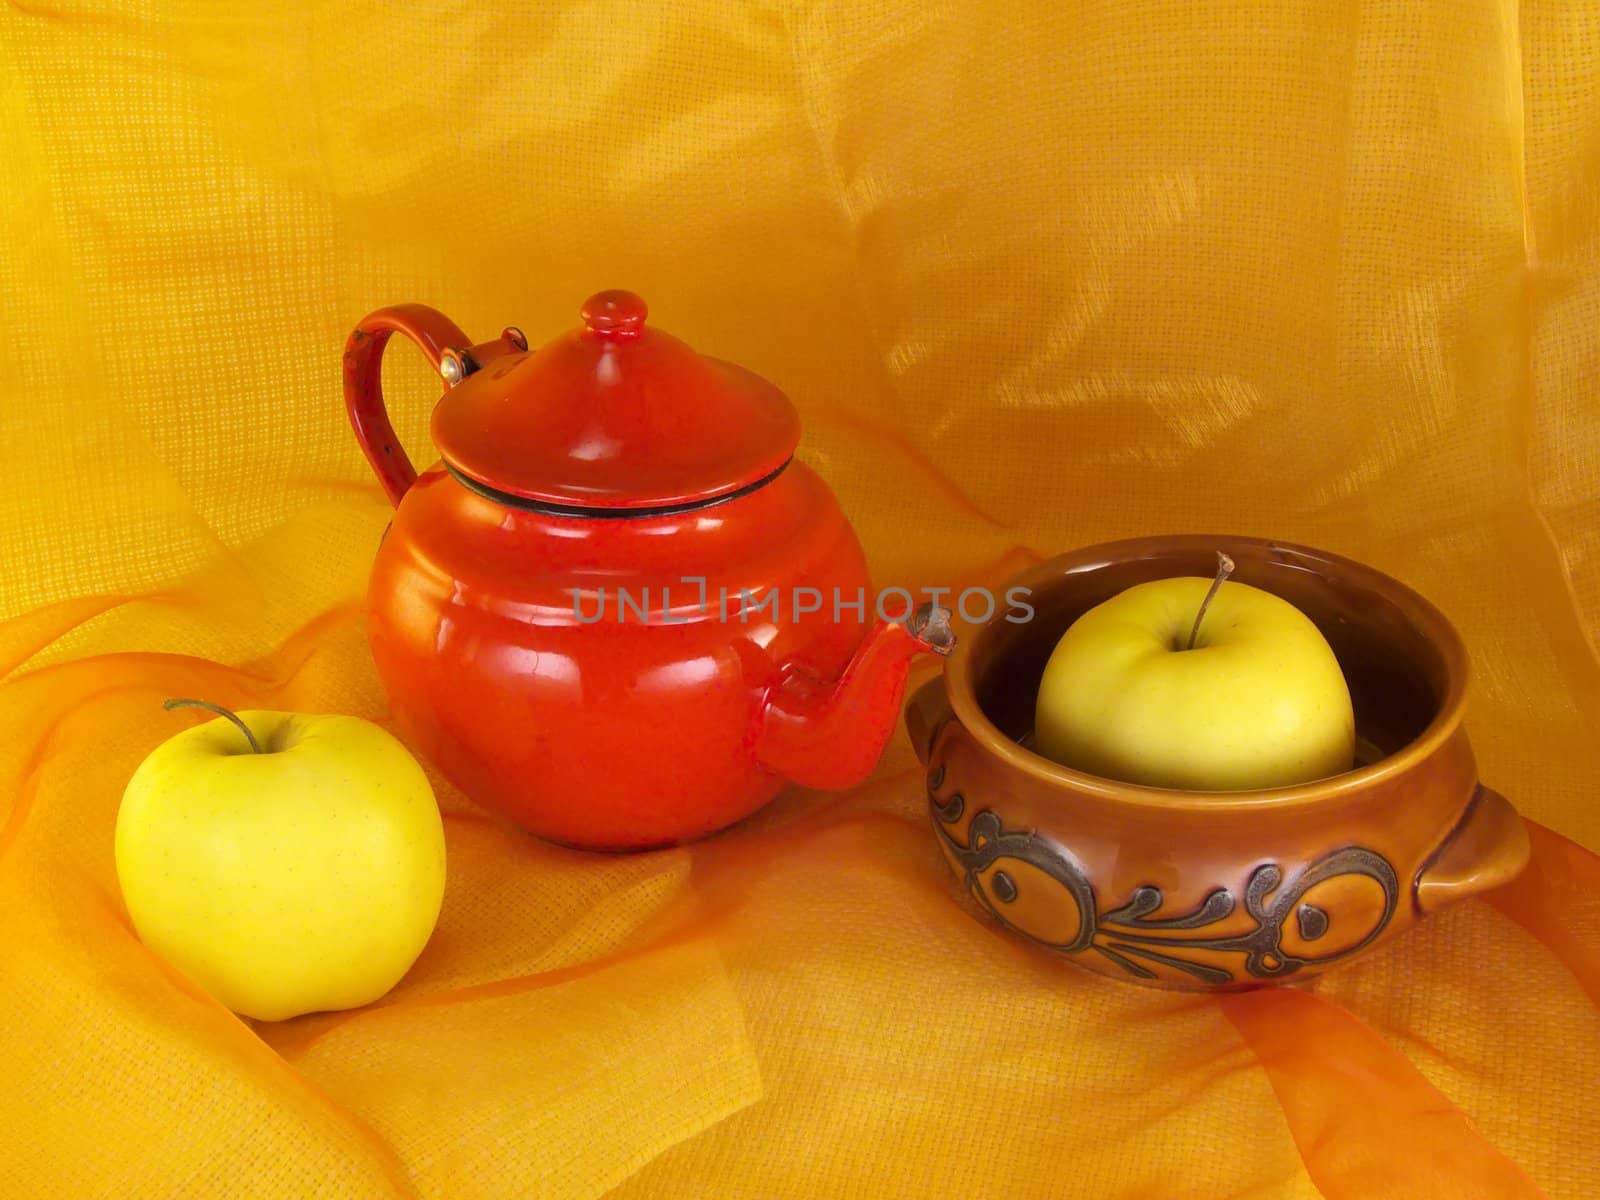 Still life with red teapot by jbouzou